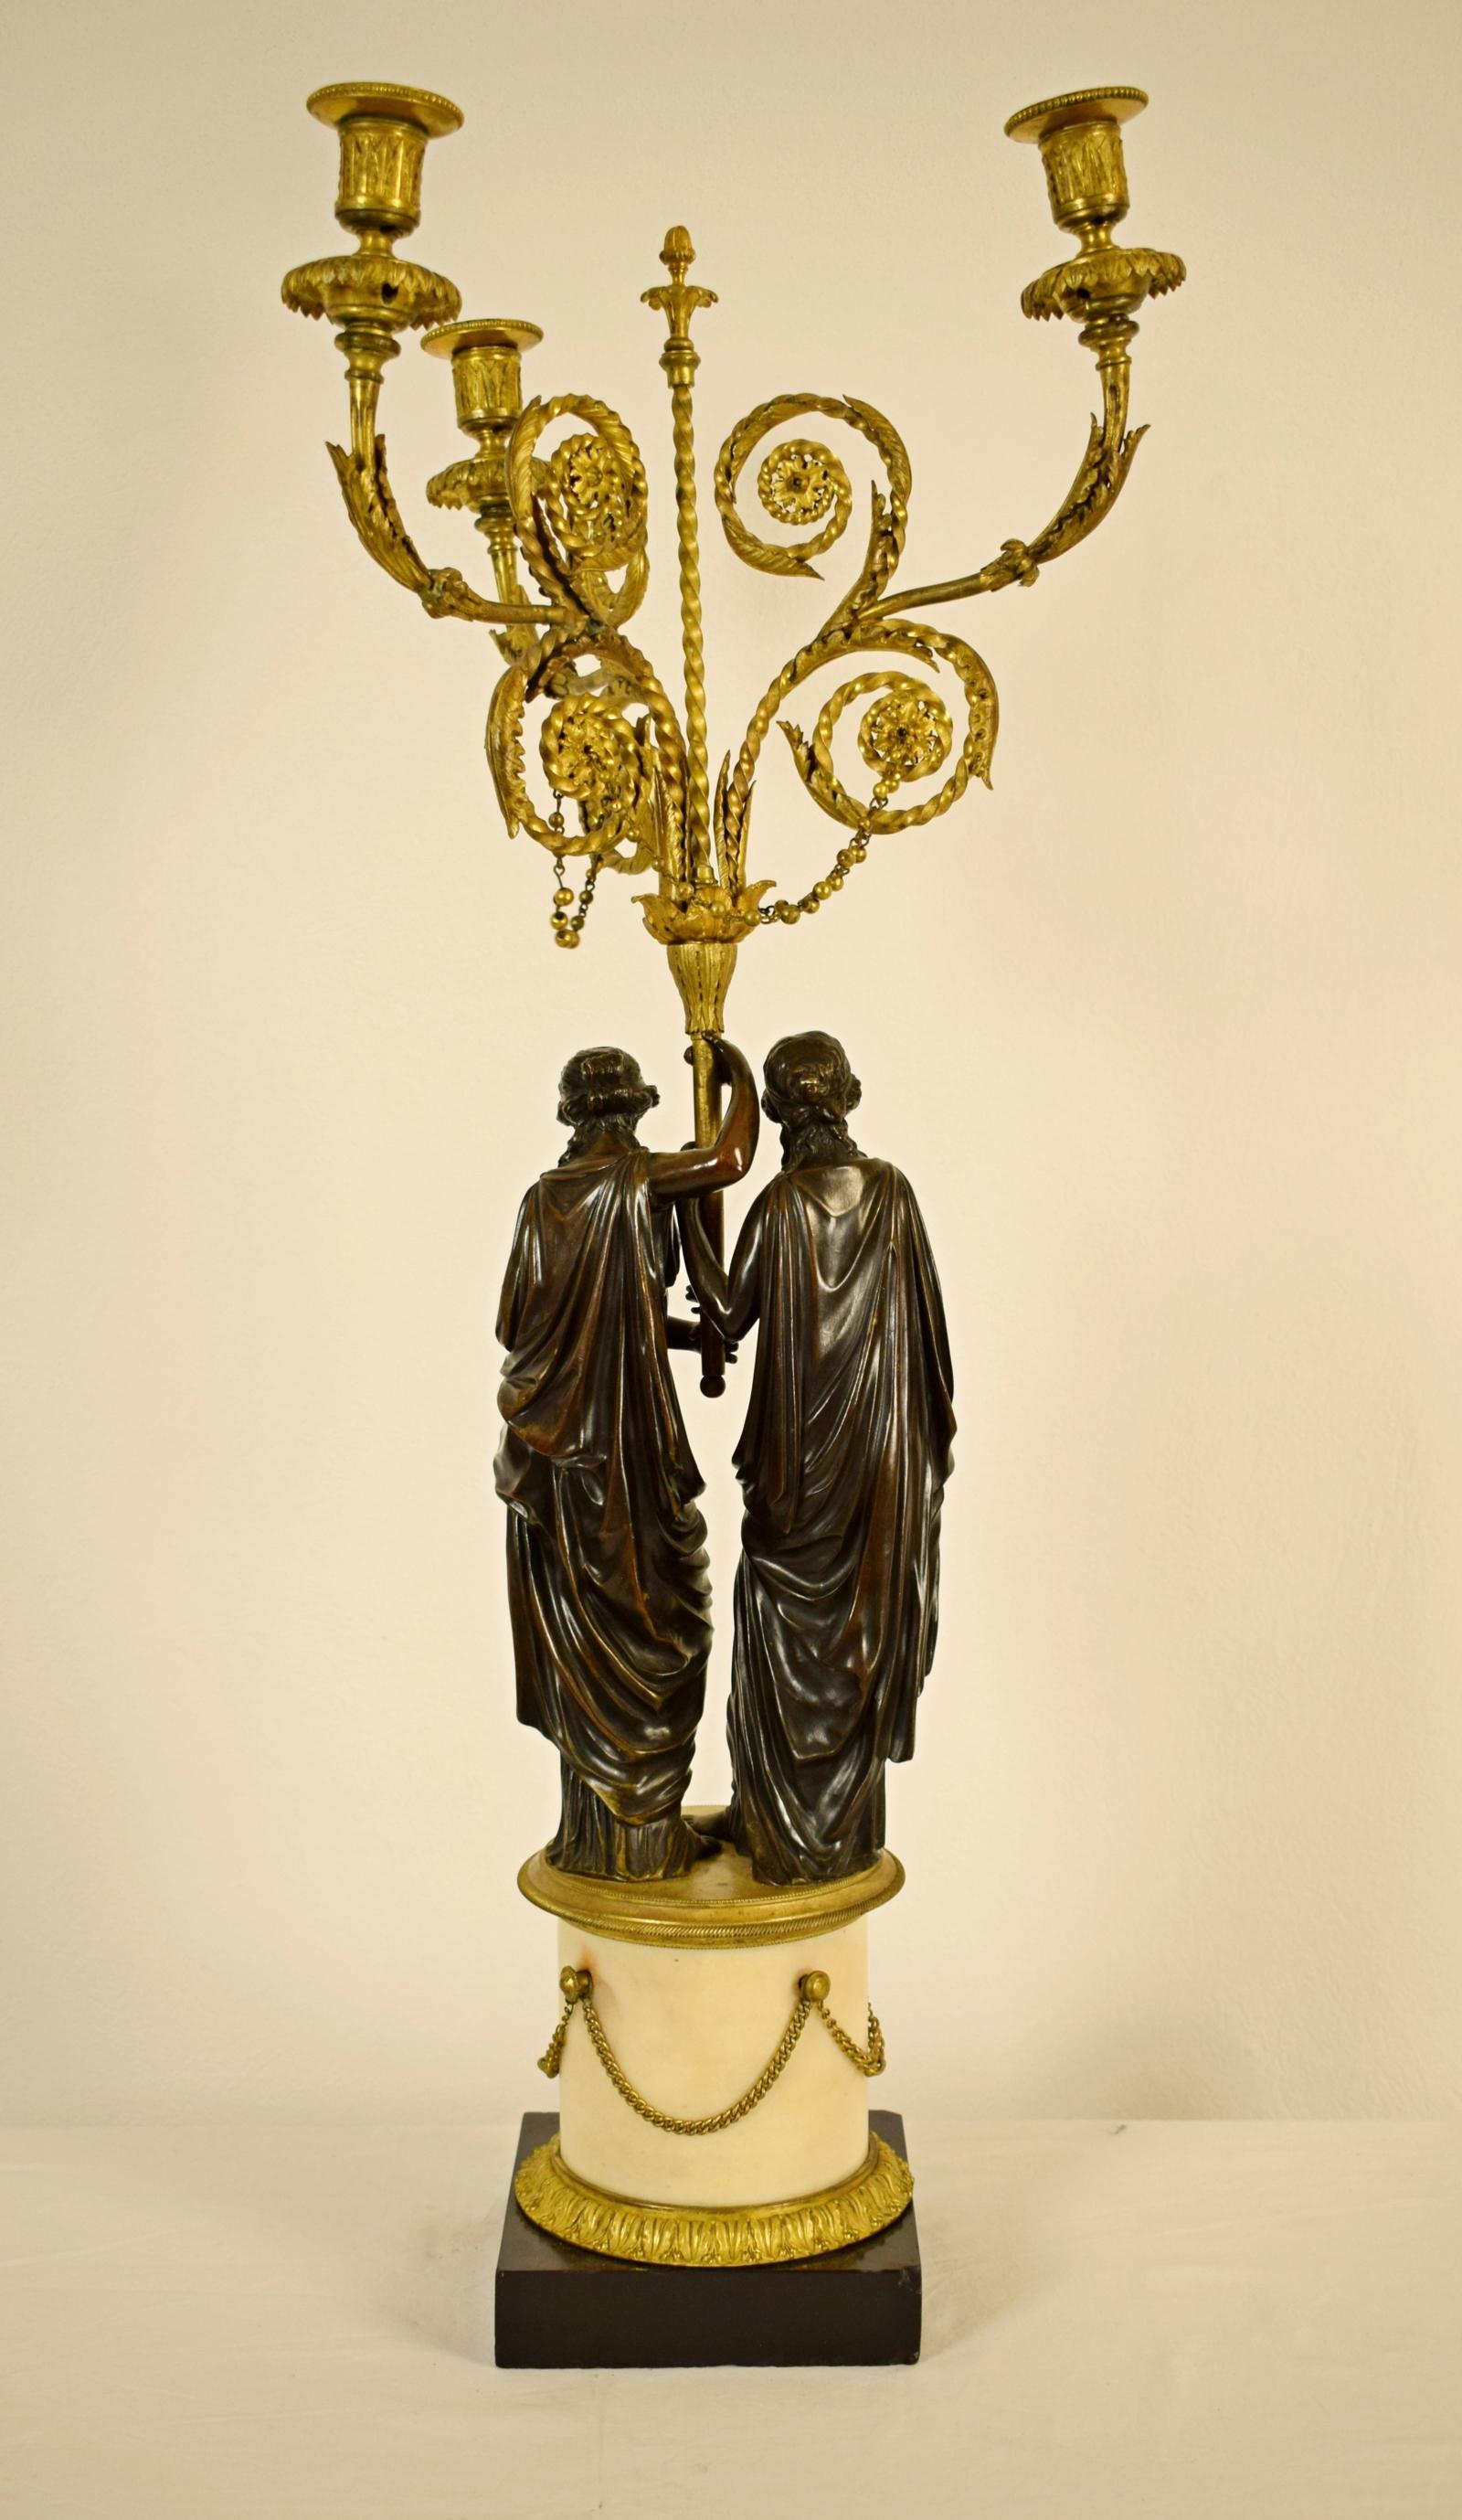 18th century, French bronze three-light candelabra with female figures

This three-light candelabra is made of patinated and gilt bronze. It was made in France in the 18th Century. It’s composed of a group of two magnificent young women dressed in